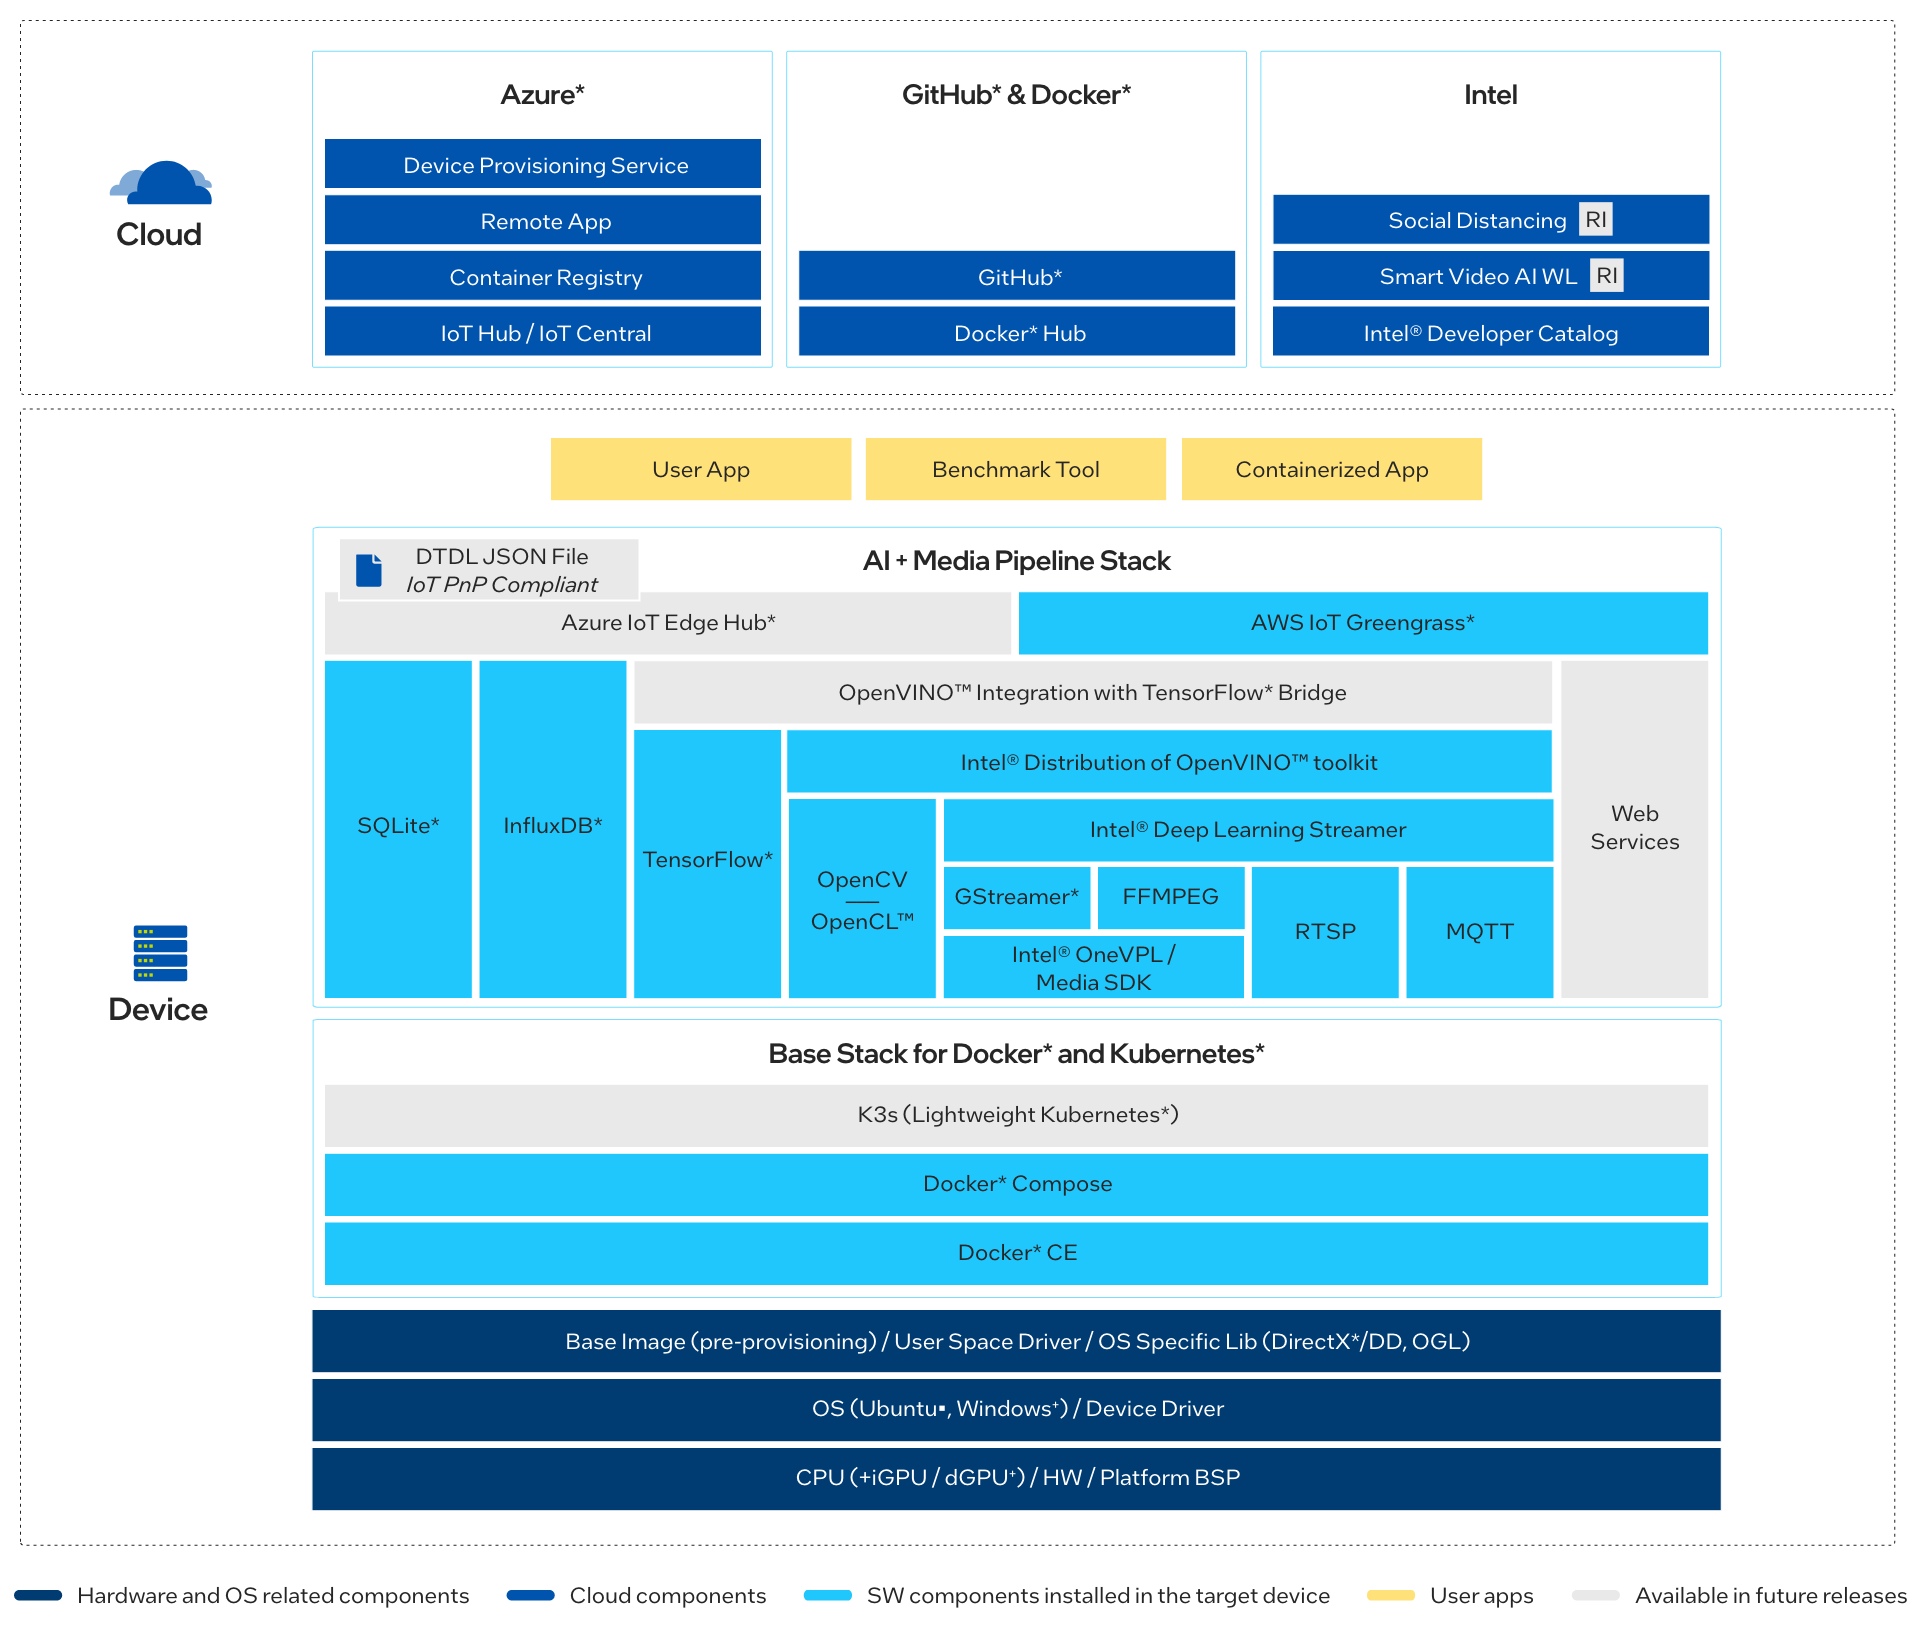 The architecture is represented by a complex block diagram. The top block starts with Cloud on the left, then a box with Azure* and its features, then a box with GitHub and Docker, then a final one with Intel features. The box below it starts with Device on the left, and then multiple levels of boxes next to it. AI + Media Pipeline Stack is on top of the Base Stack for Docker and Kubernetes. 